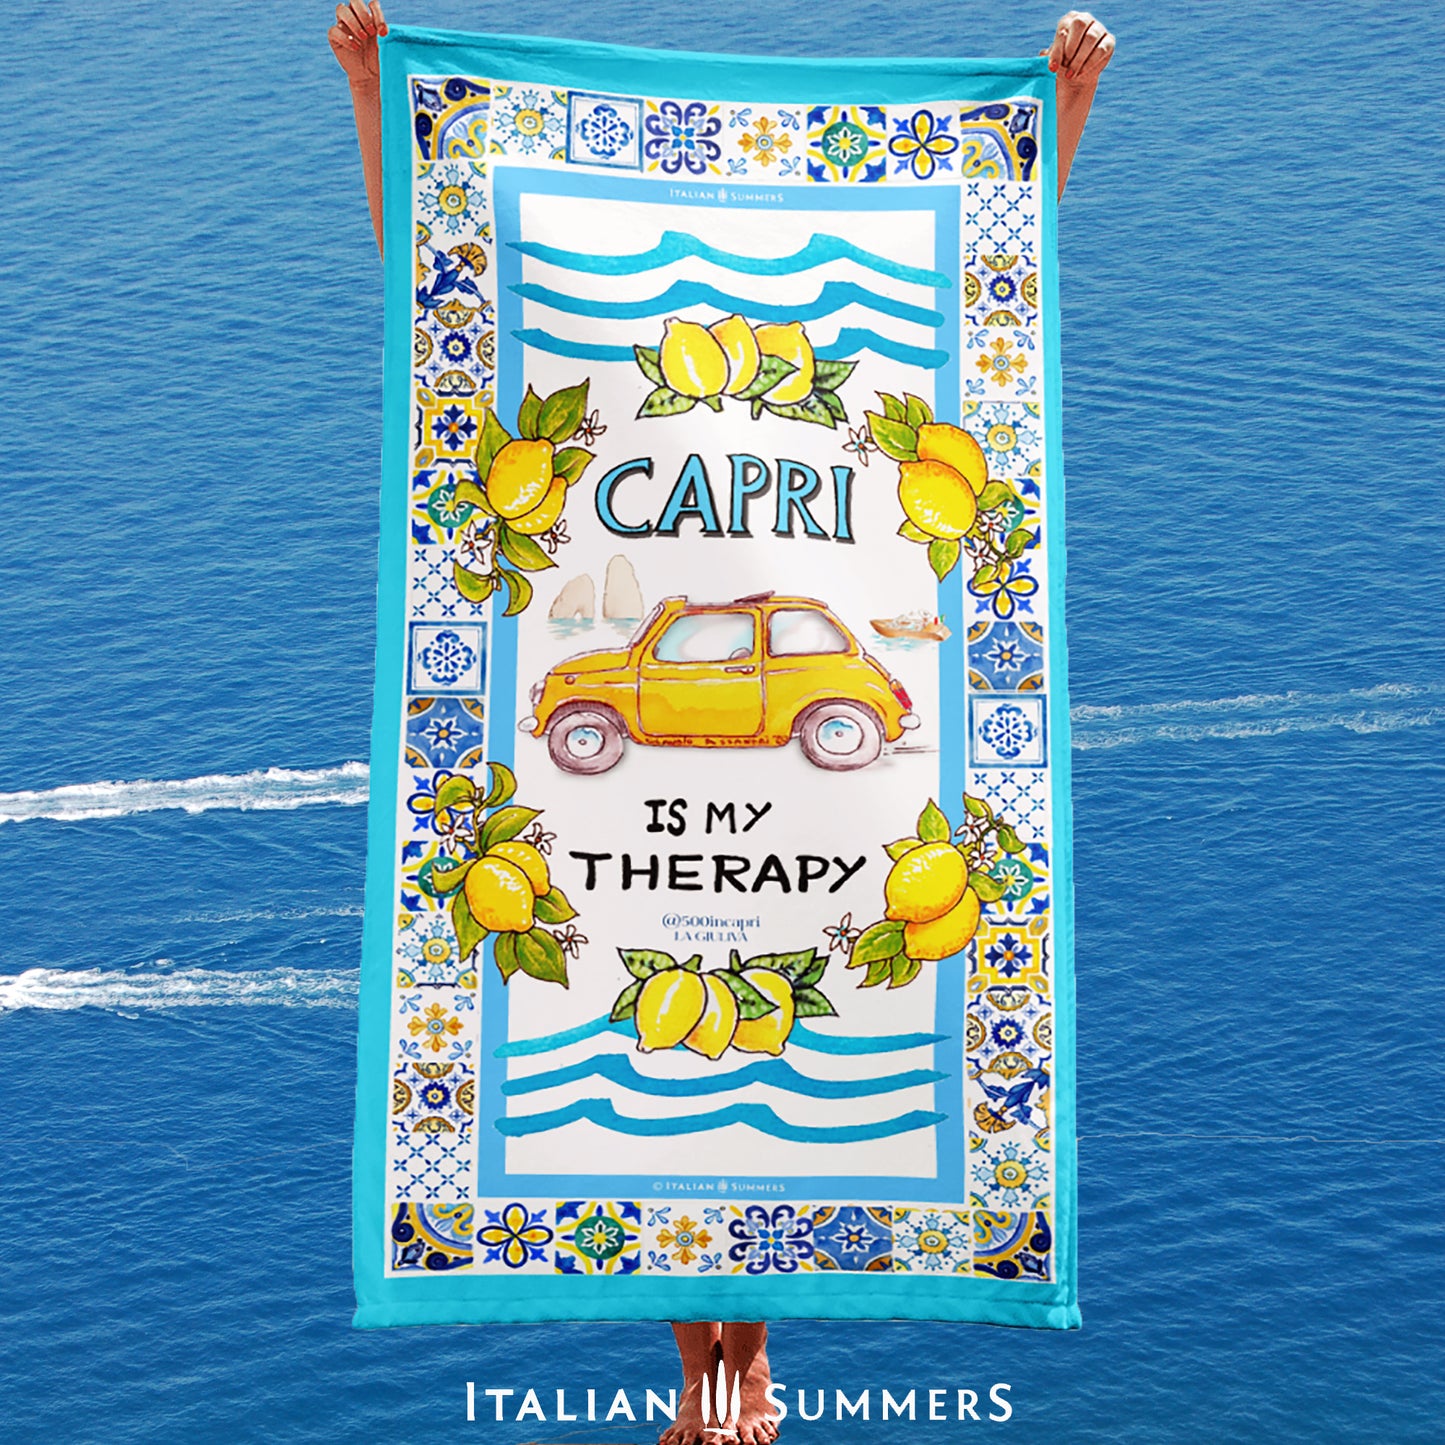 Italy Capri inspired beach towel printed with a frame of colorful italian maiolica tiles  around a vintage yellow FIAT 500 car  parked on an overlook by the famous Faraglioni. Made by Italian Summers